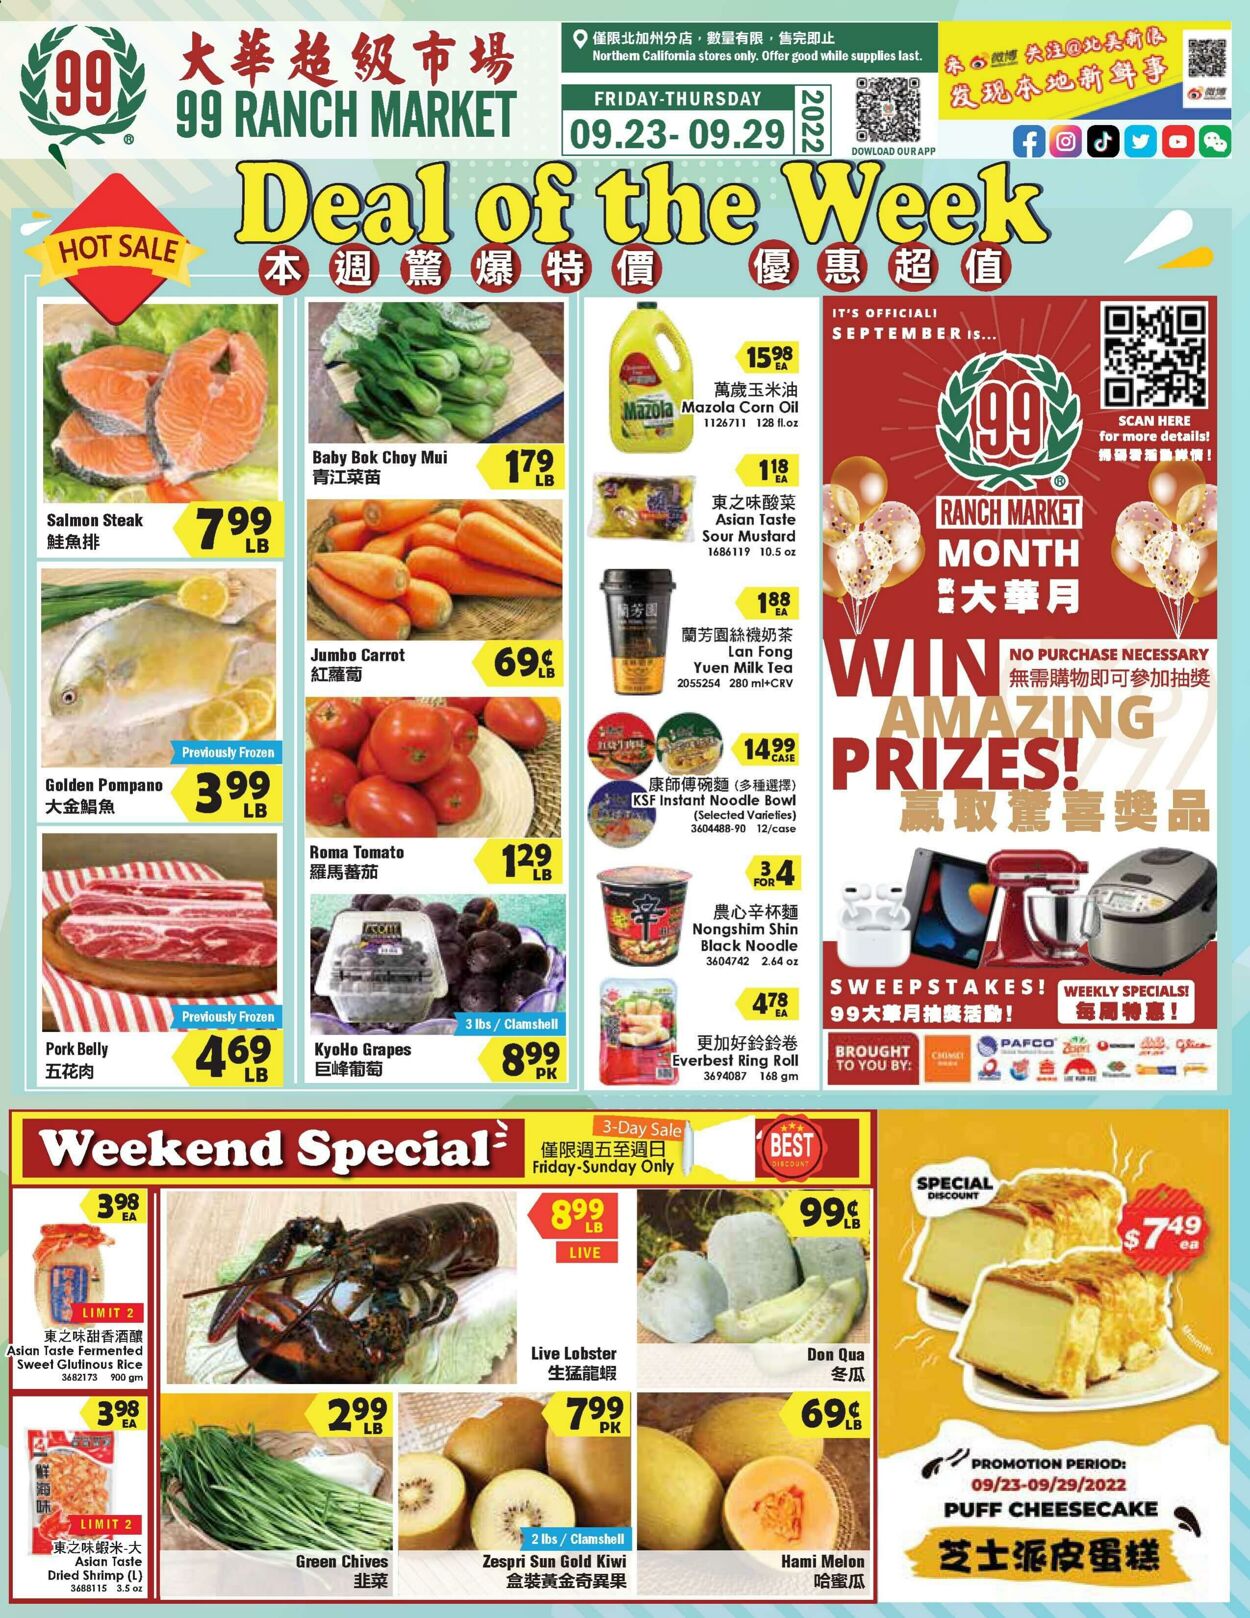 99 Ranch Market Promotional weekly ads